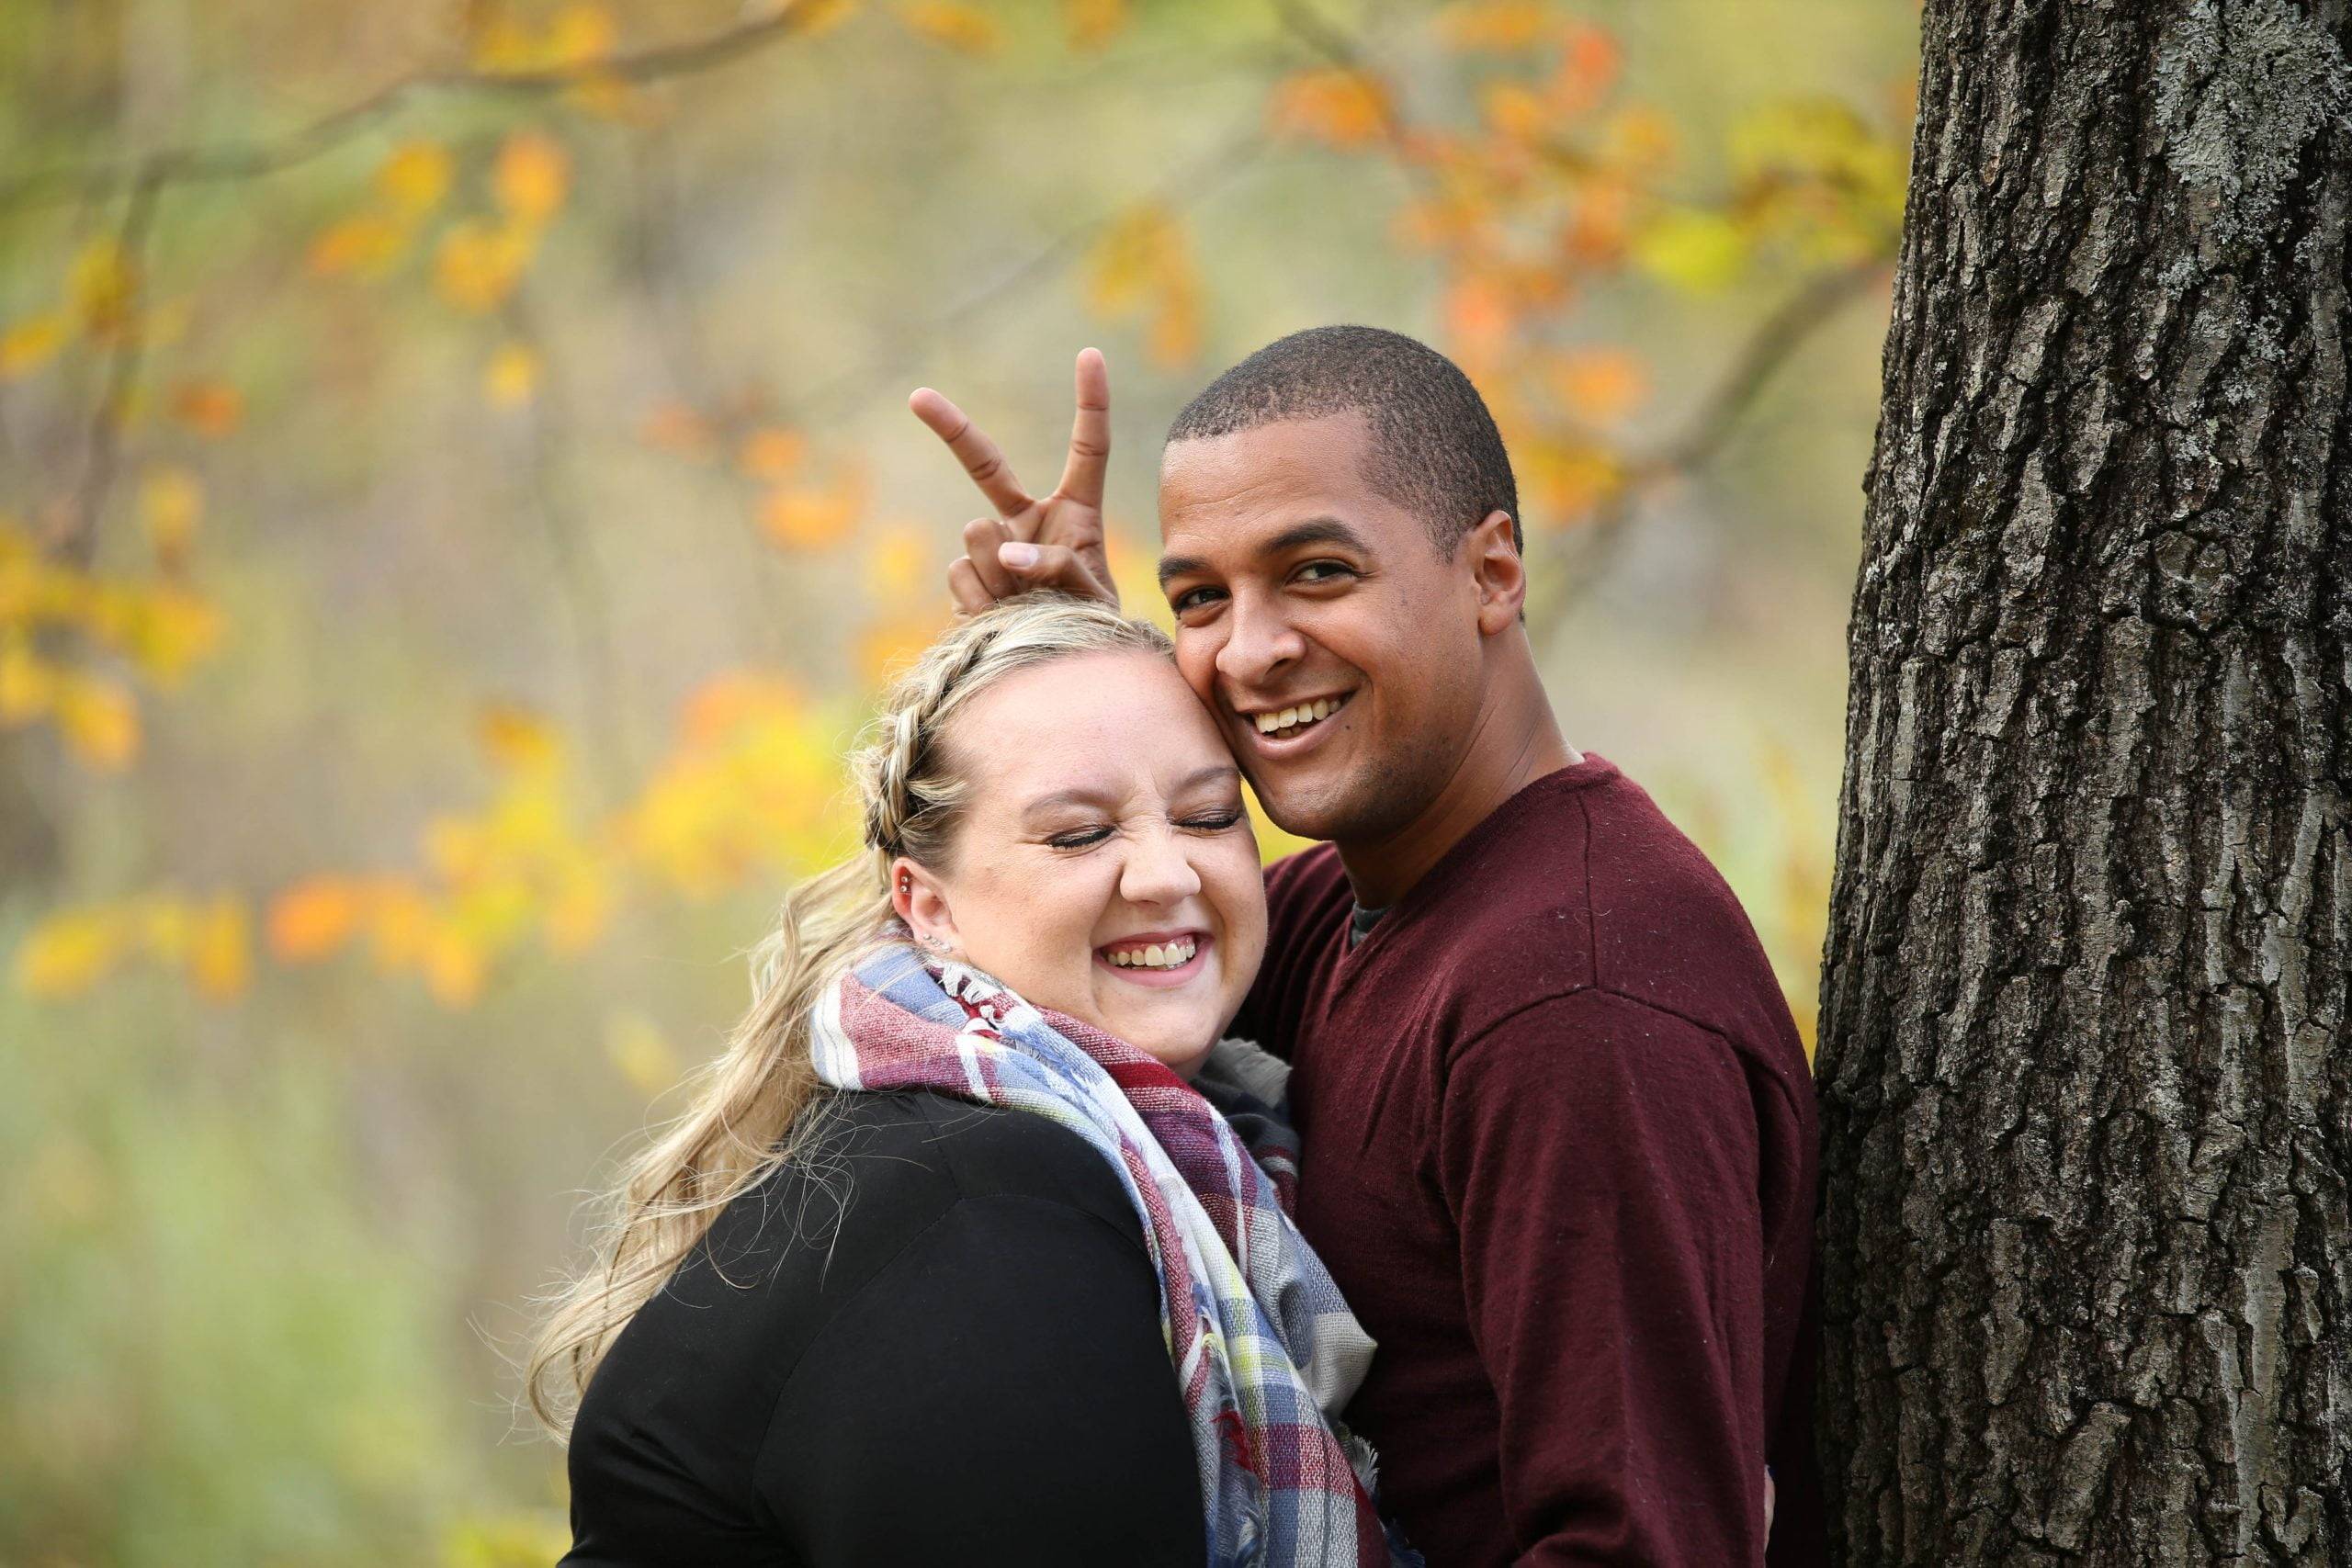 A man and woman posing for a photo in the fall.